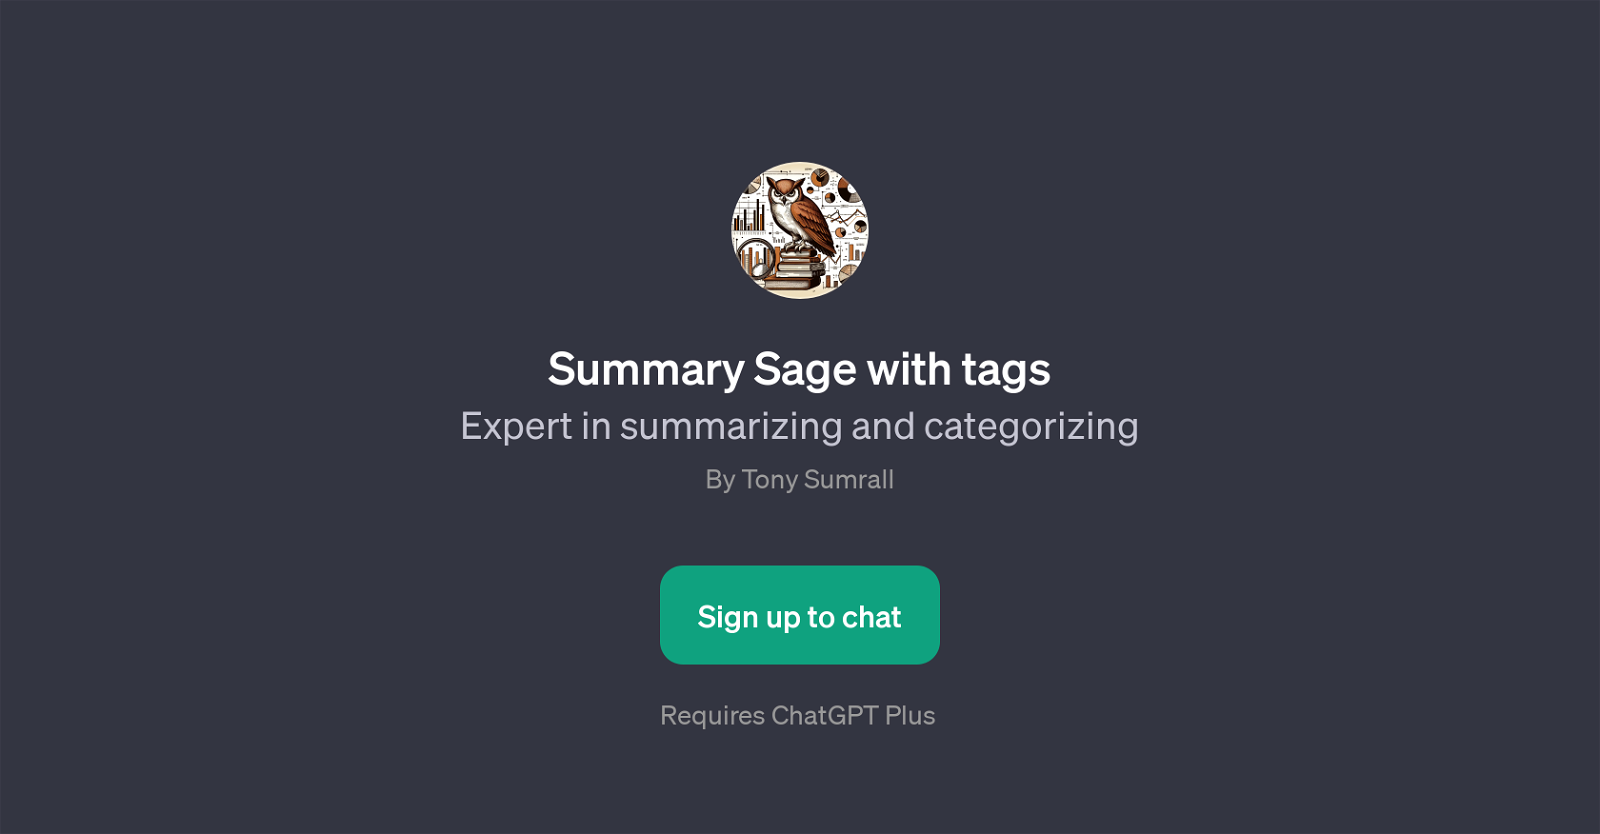 Summary Sage with tags website